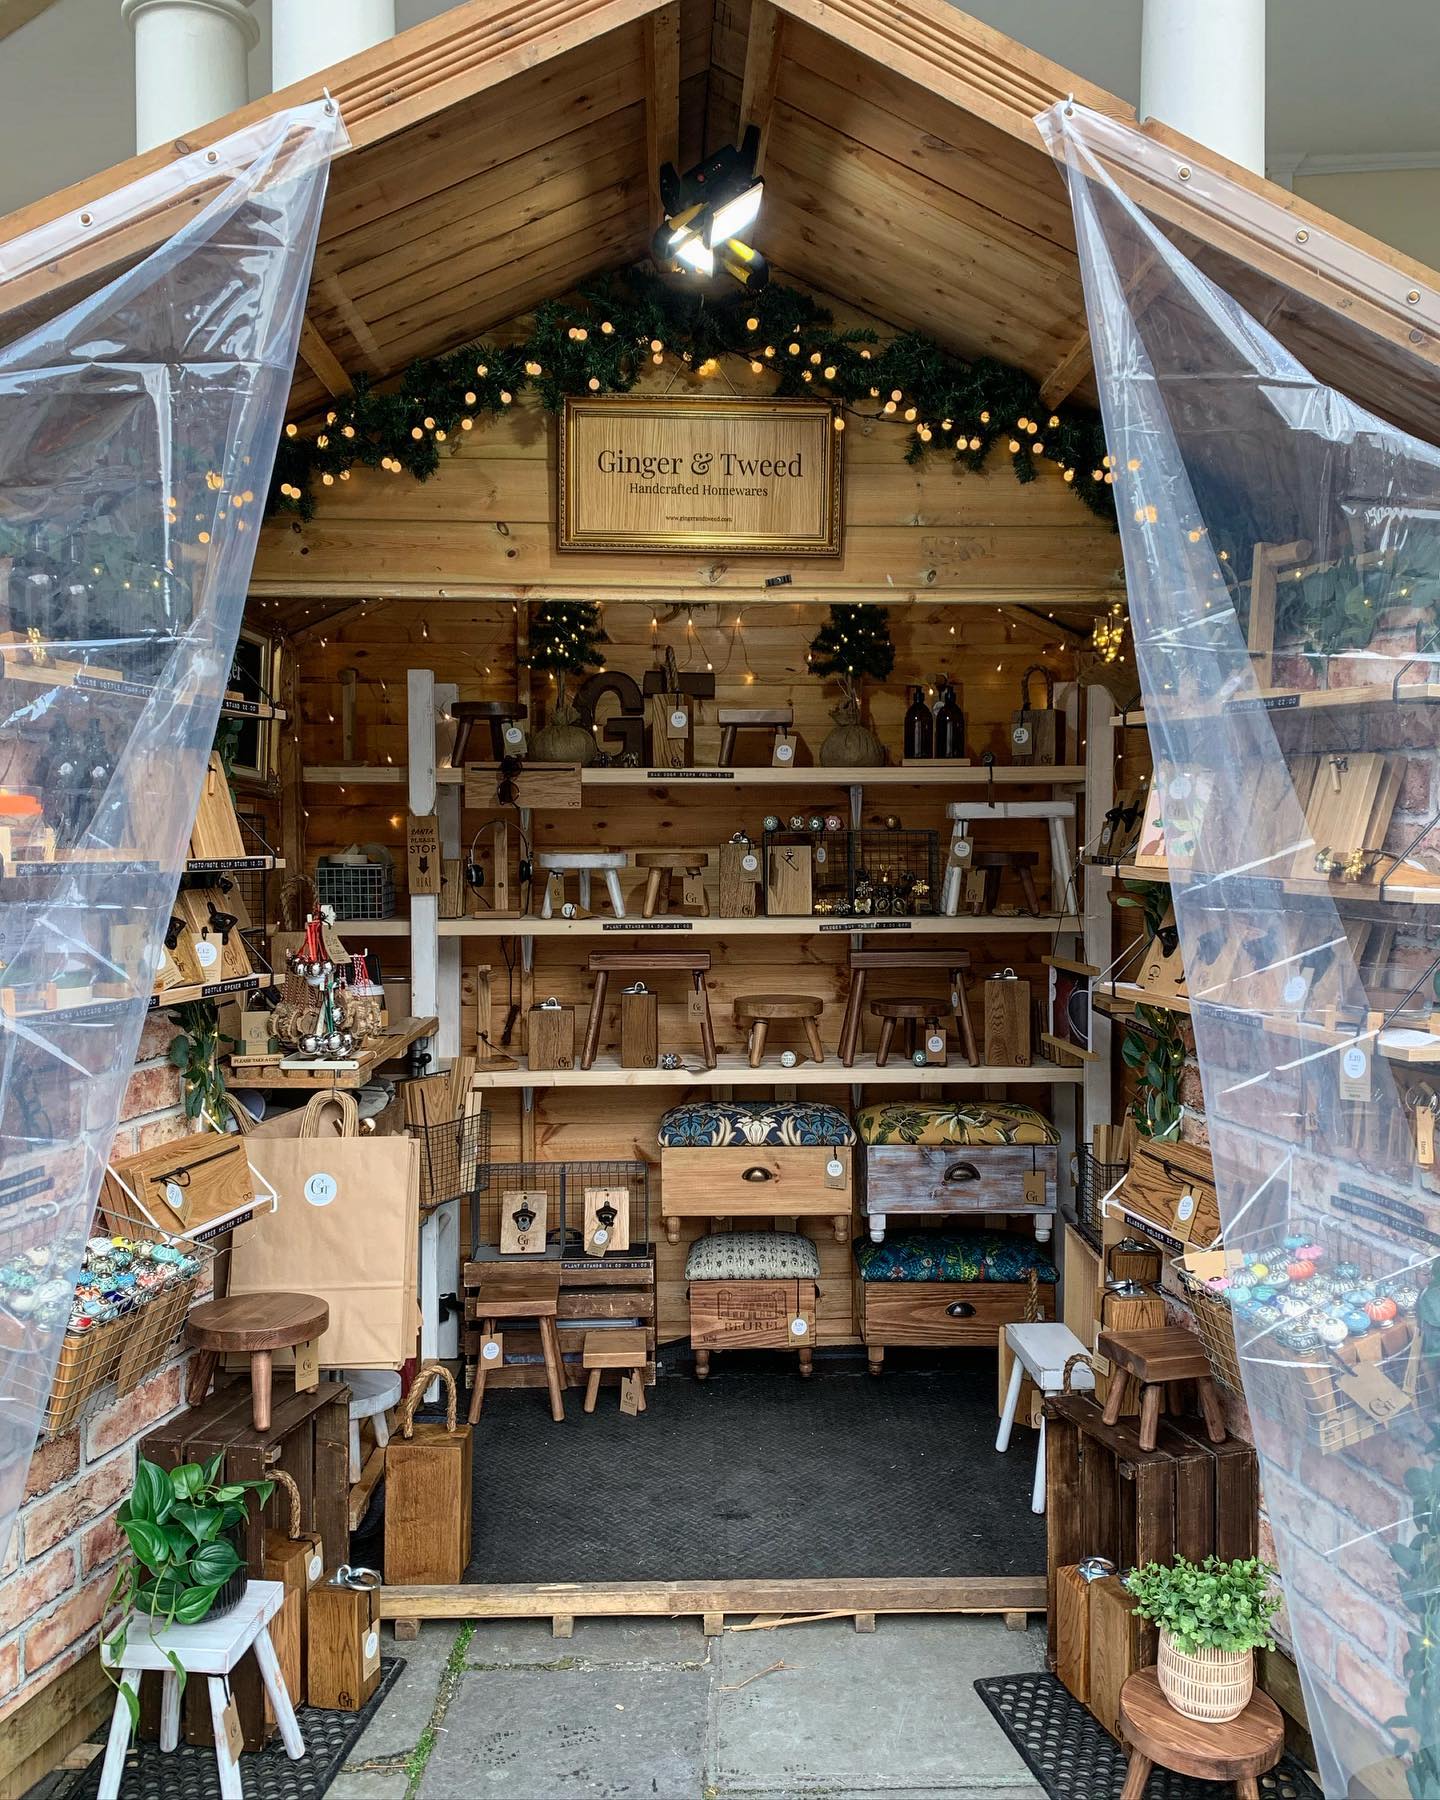 What a fab first day @bathchristmasmarket A tad soggy at times but we managed to stay reasonably dry with the help of some clear shower curtains  today should be much brighter and we can’t wait to open our doors again! Bath Street 10am-8pm today